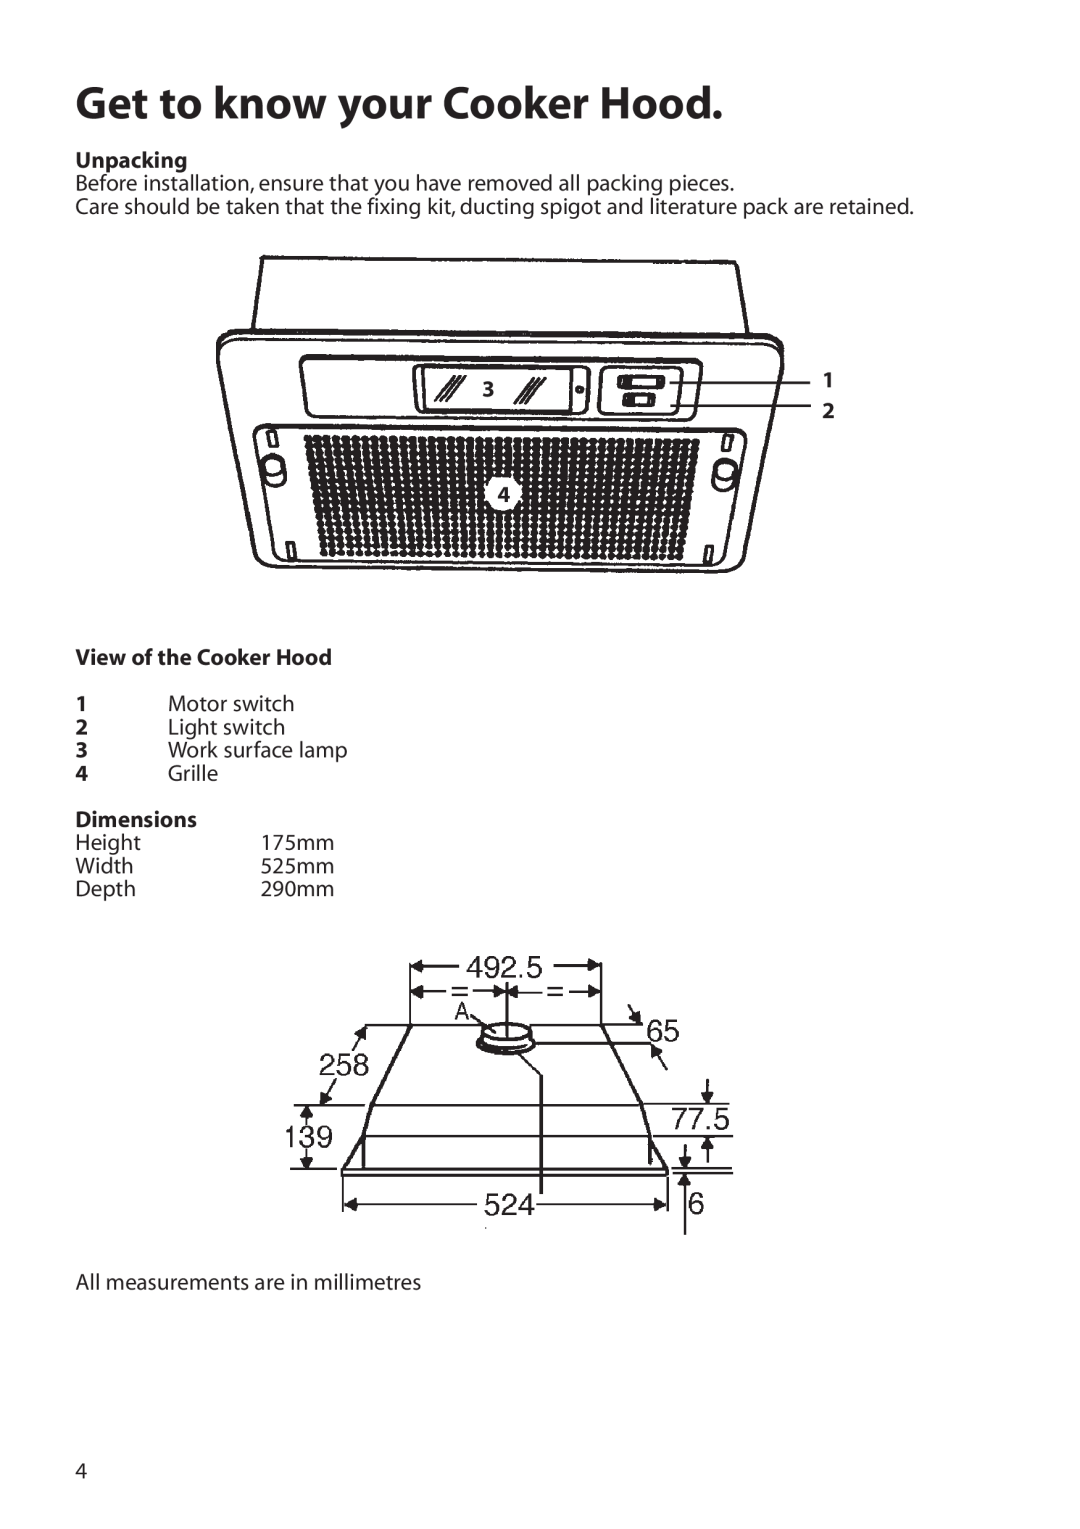 Hotpoint HTU30 manual Get to know your Cooker Hood, Unpacking, View of the Cooker Hood, Dimensions 